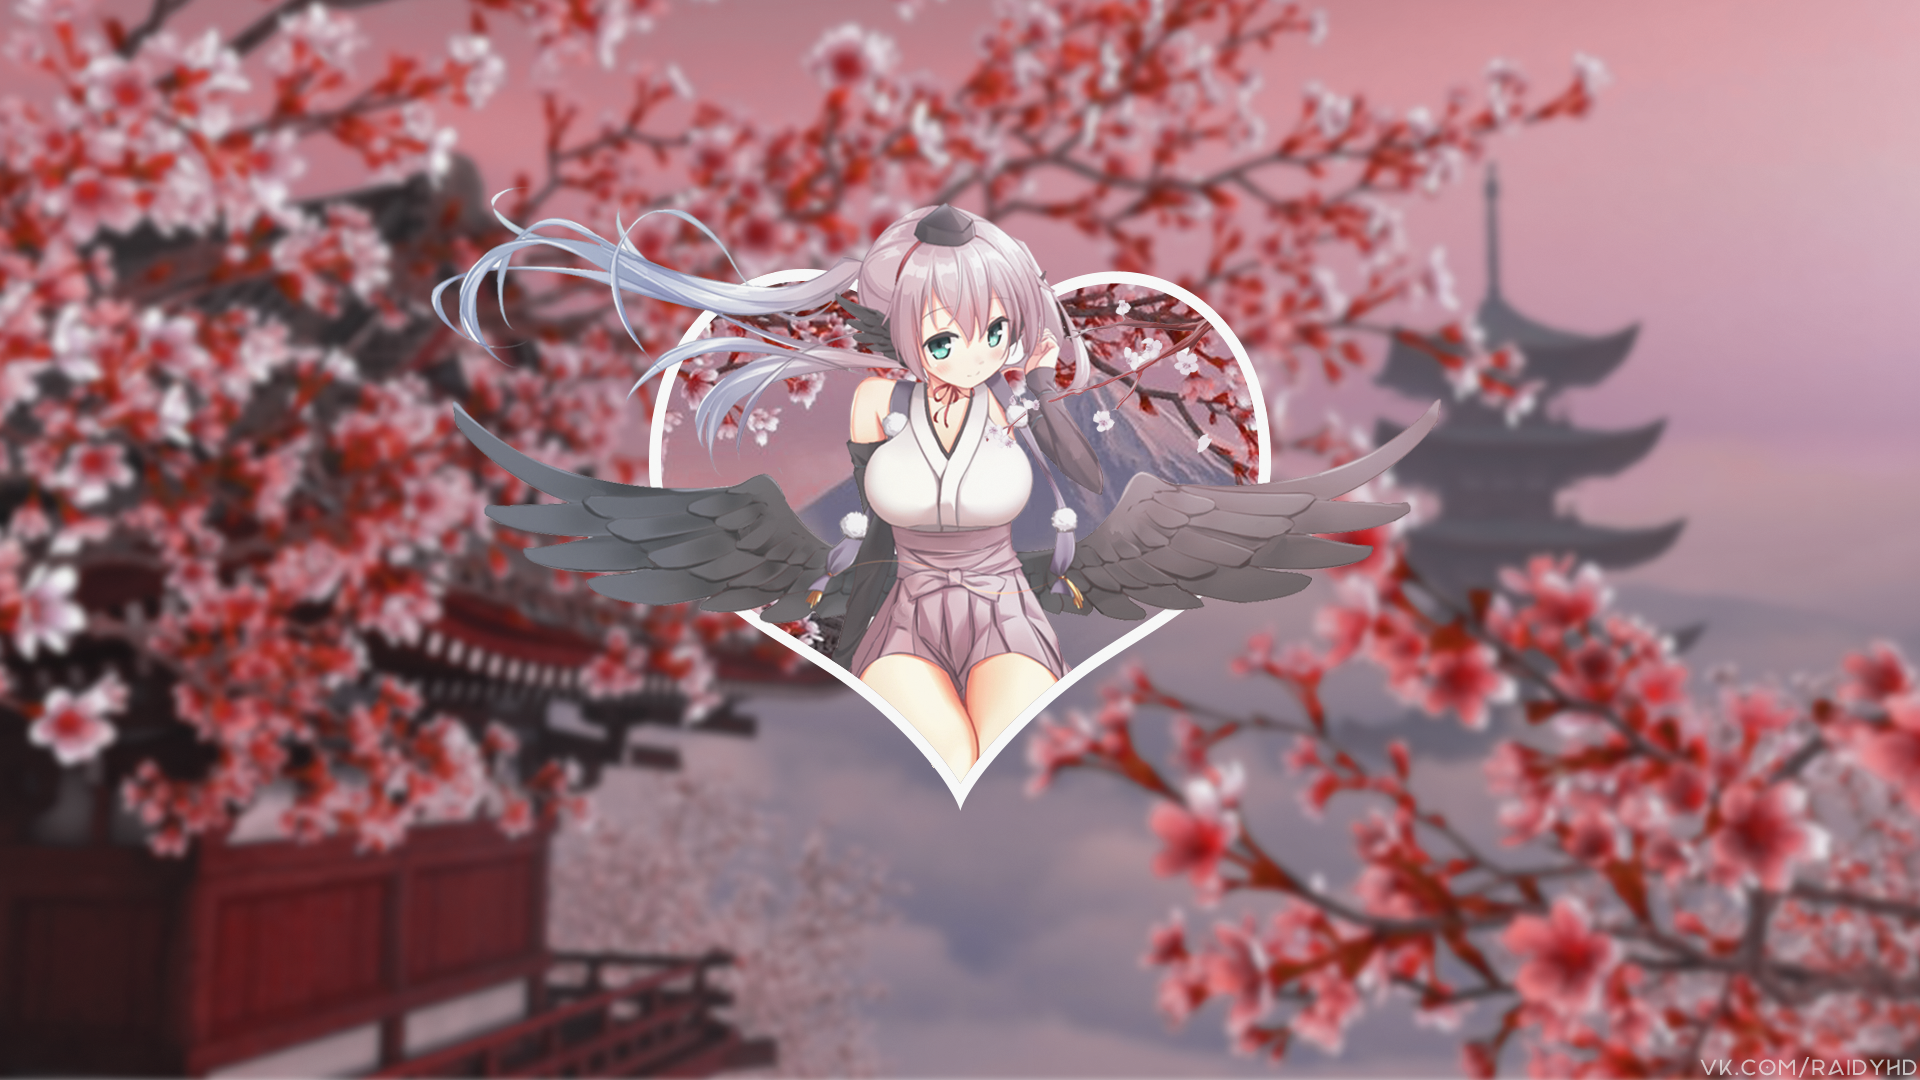 Anime 1920x1080 anime anime girls picture-in-picture cherry blossom